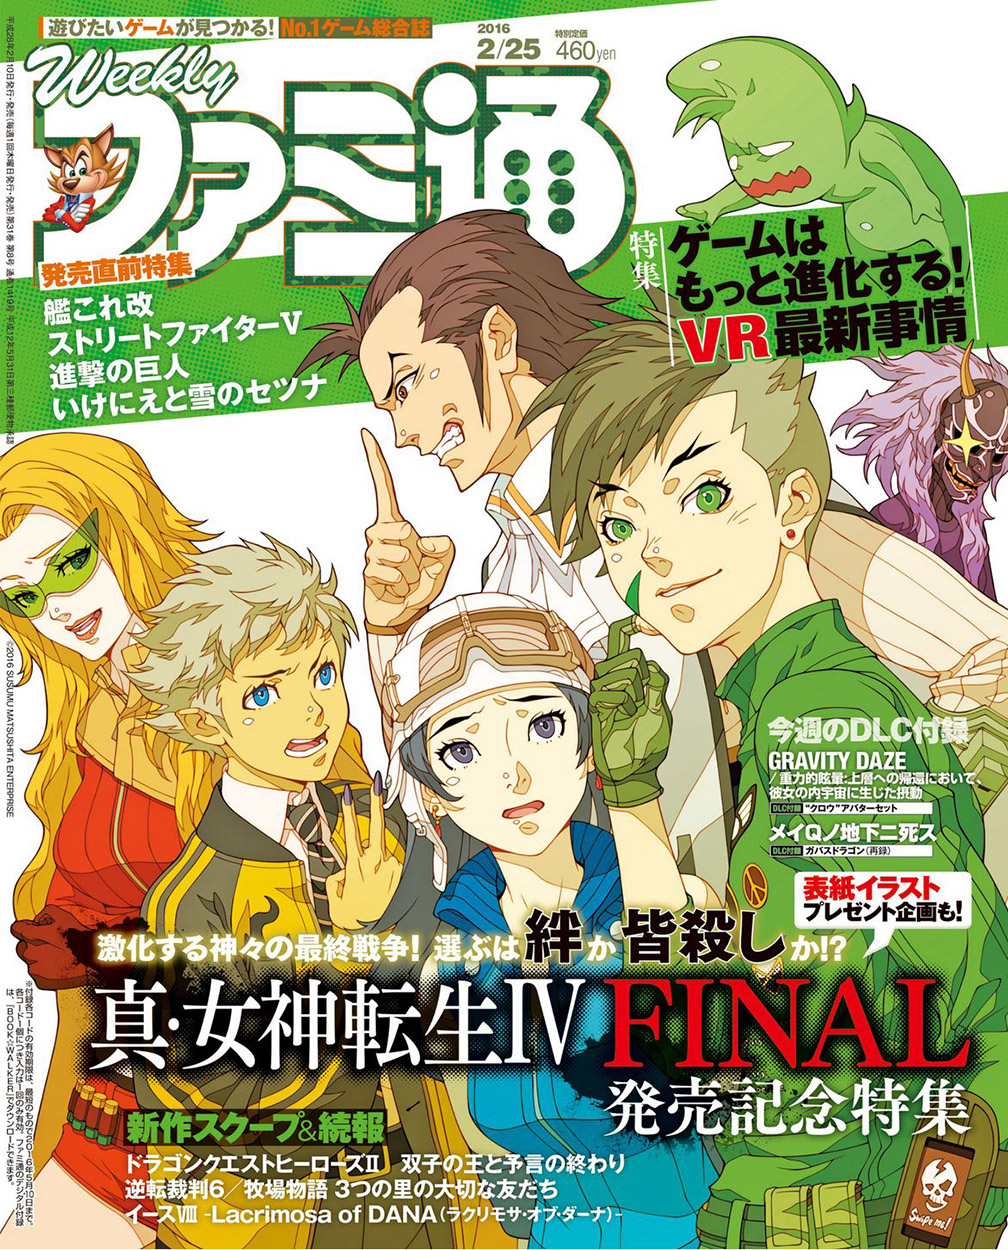 Persona Central Compilation Of Famitsu Magazine Covers Featuring Atlus Games T Co P1ffjpet3y T Co Jkpl8w5r34 Twitter